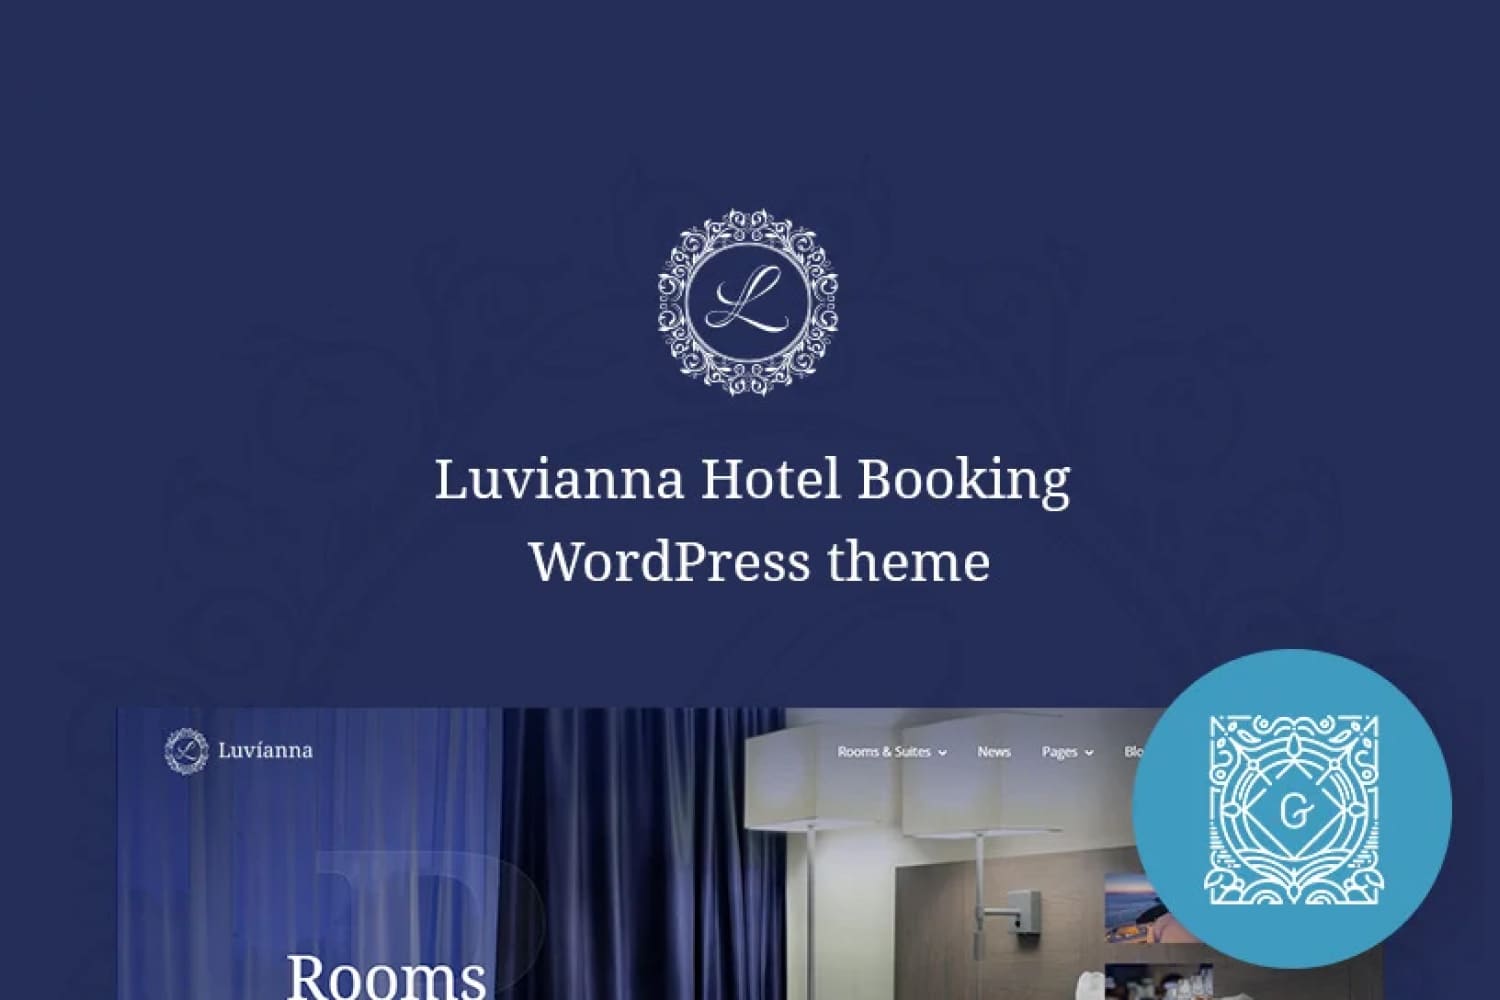 The main page of the hotel website with a blue background, monograms and a photo of the room.